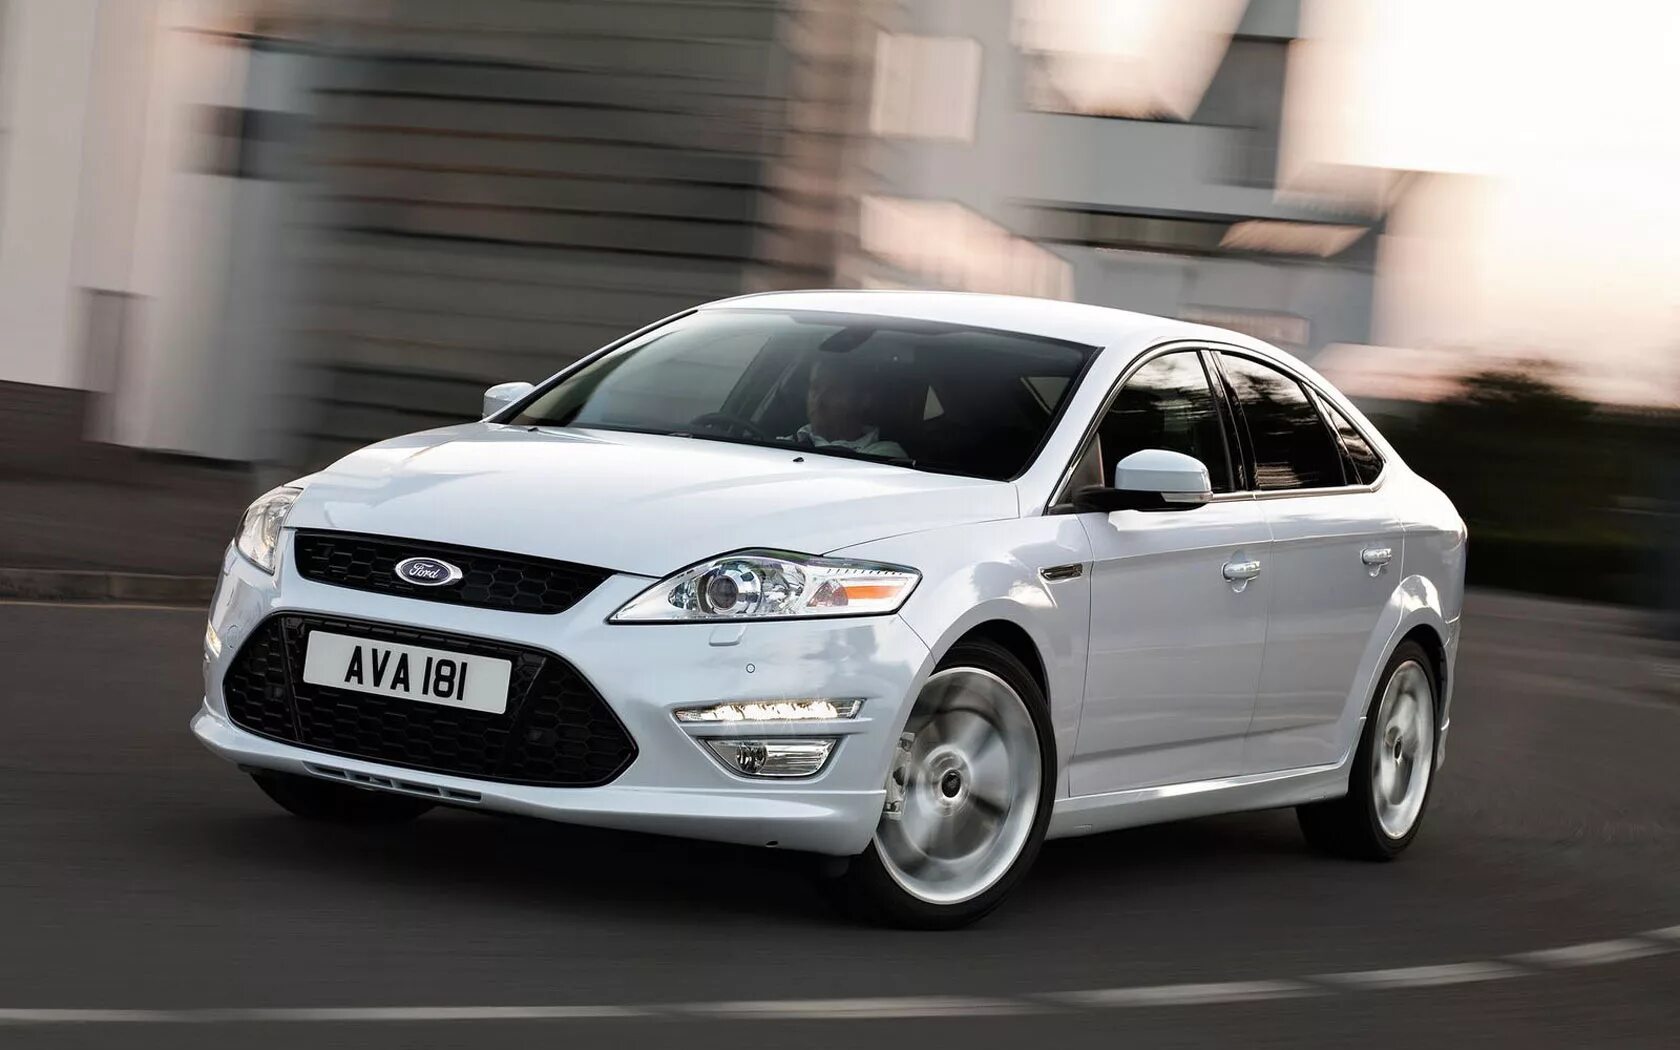 Машина форд фото. Ford Mondeo 2011. Ford Mondeo хэтчбек 2010. Ford Mondeo 4 Sport. Ford Focus Ford Mondeo.